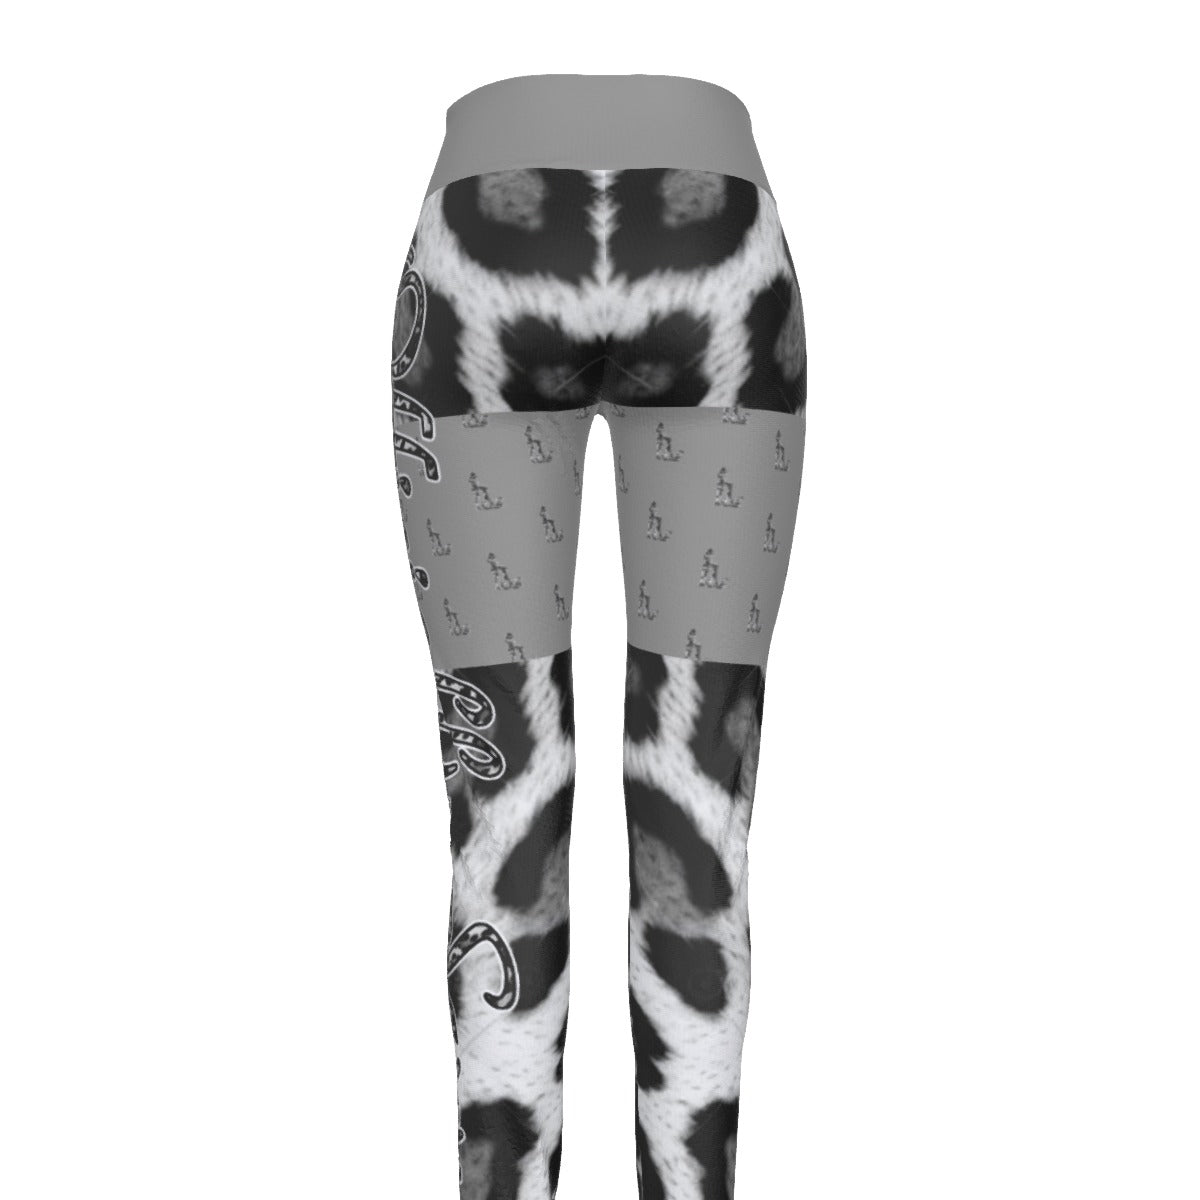 Officially Sexy Snow Leopard Print Collection Women's Grey High Waist Thigh High Booty Popper Leggings #2 (English) 3